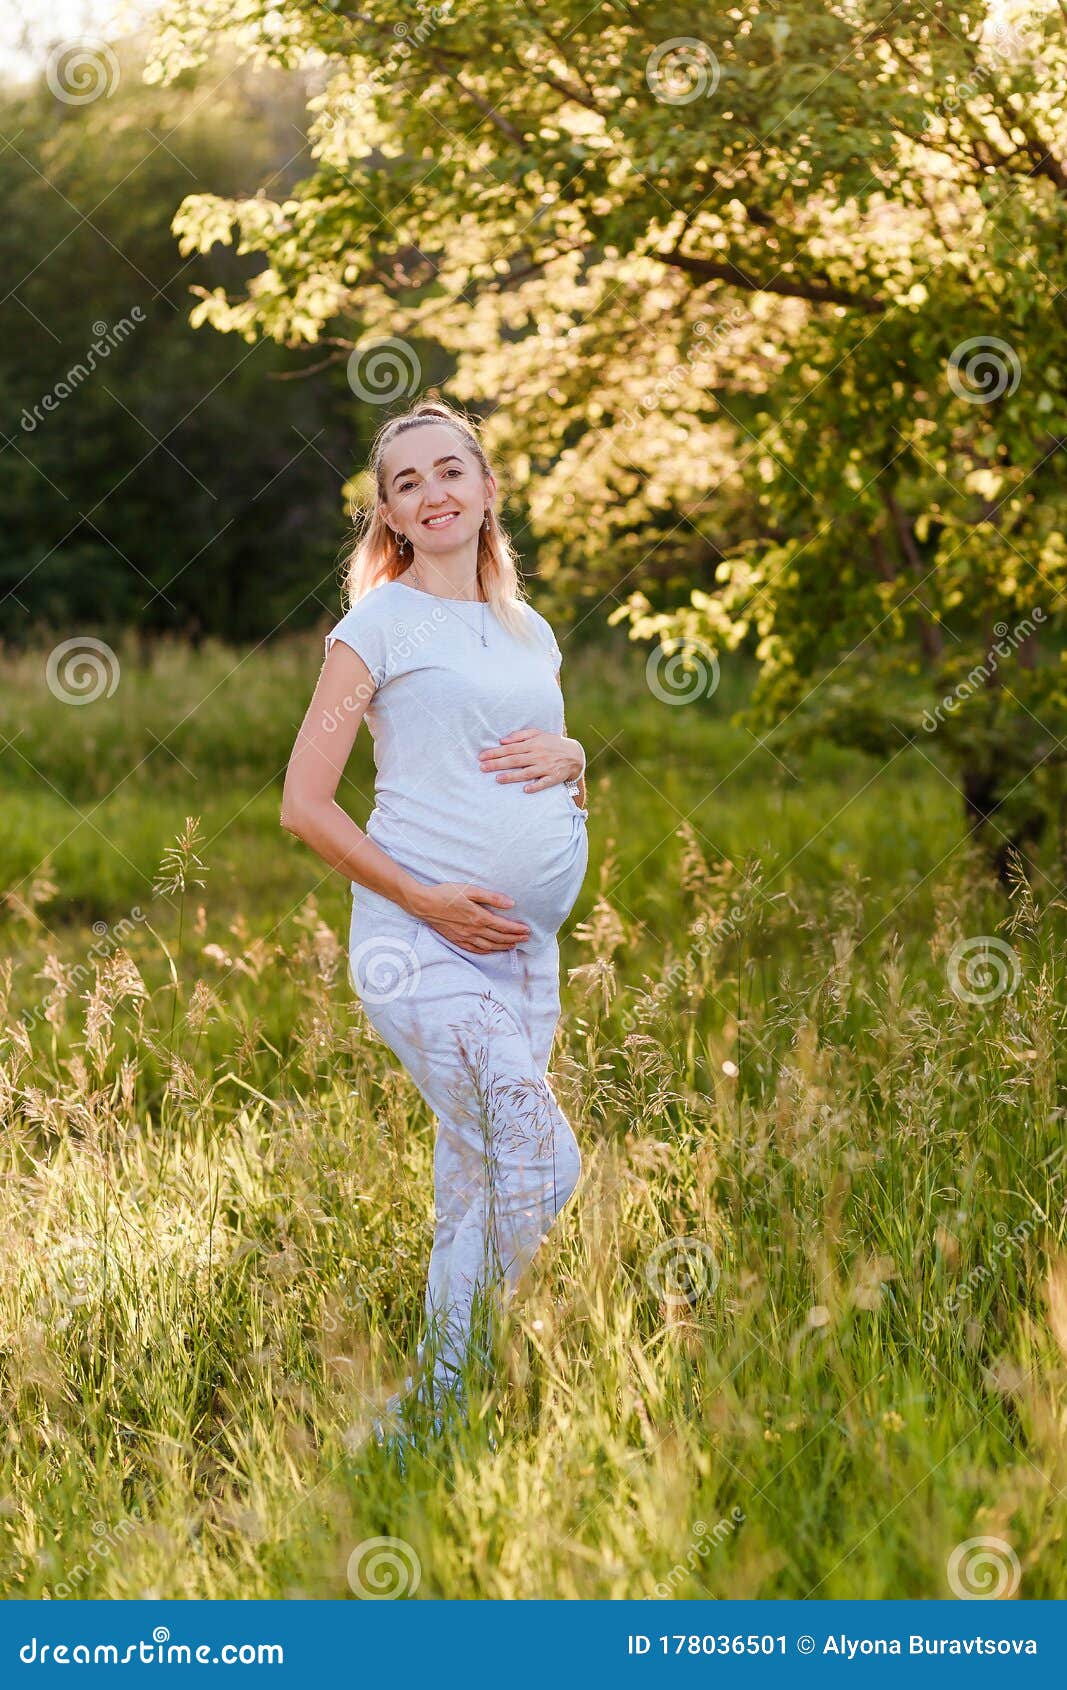 A Smiling Thirty Year Old Pregnant Woman In A Gray T Shirt